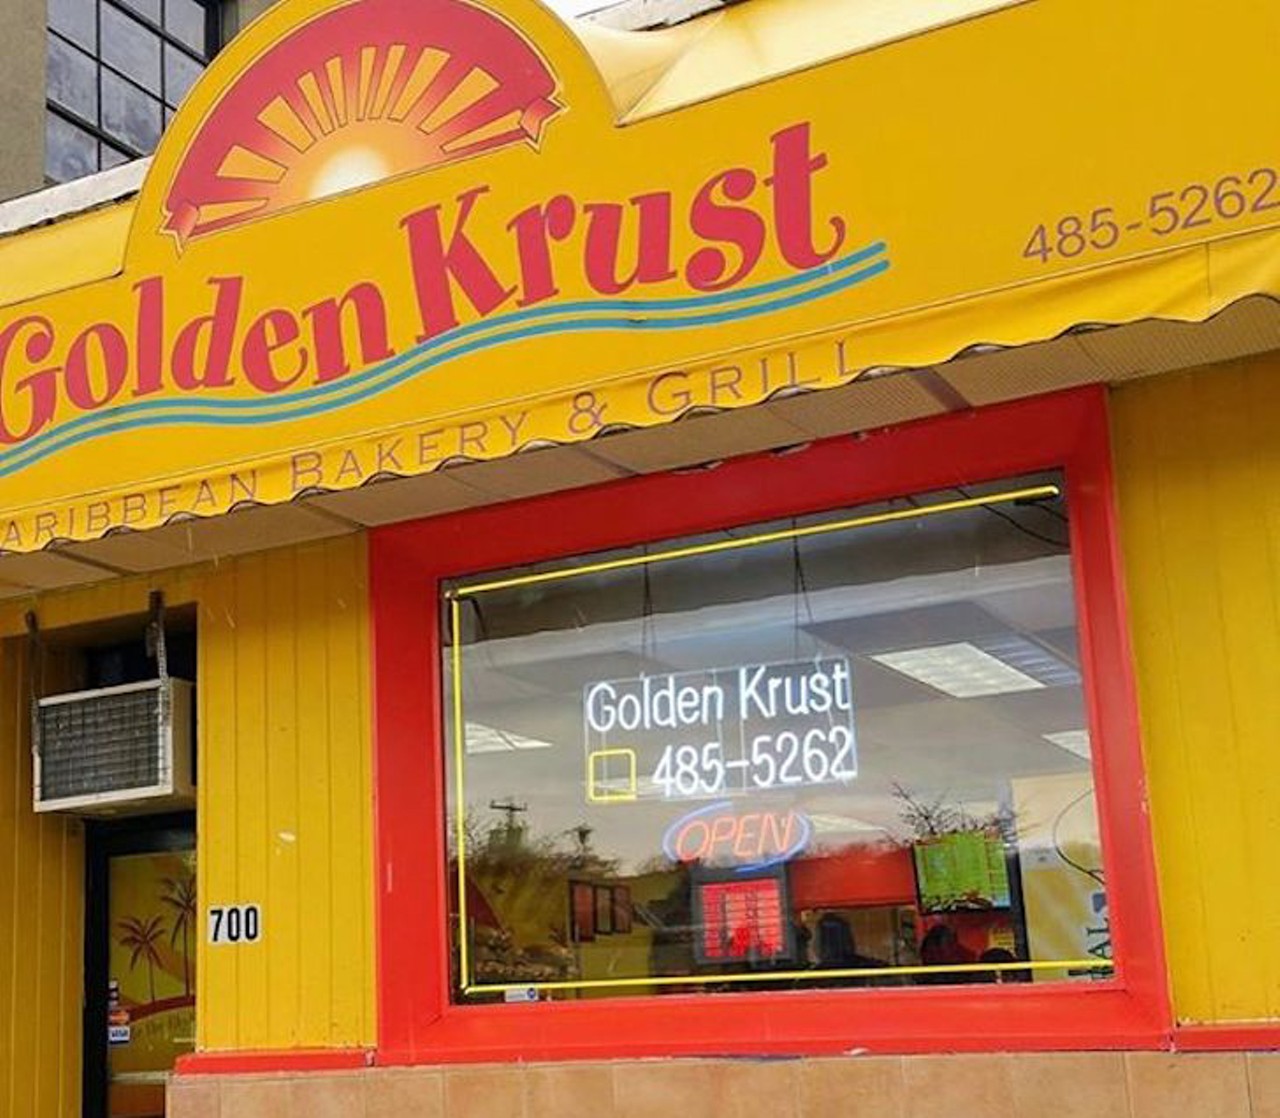 Golden Krust  
5510 W. Colonial Drive, 407-298-0543
Caribbean fast-food chains are somewhat singular entities, and foodies unfamiliar with the cuisine will find this spacious bakery and grill a proper initiation to island fare. Golden Krust takes great pride in their signature patties, offering nine different varieties from traditional spicy beef to soy.  
Photo via Golden Krust/Instagram